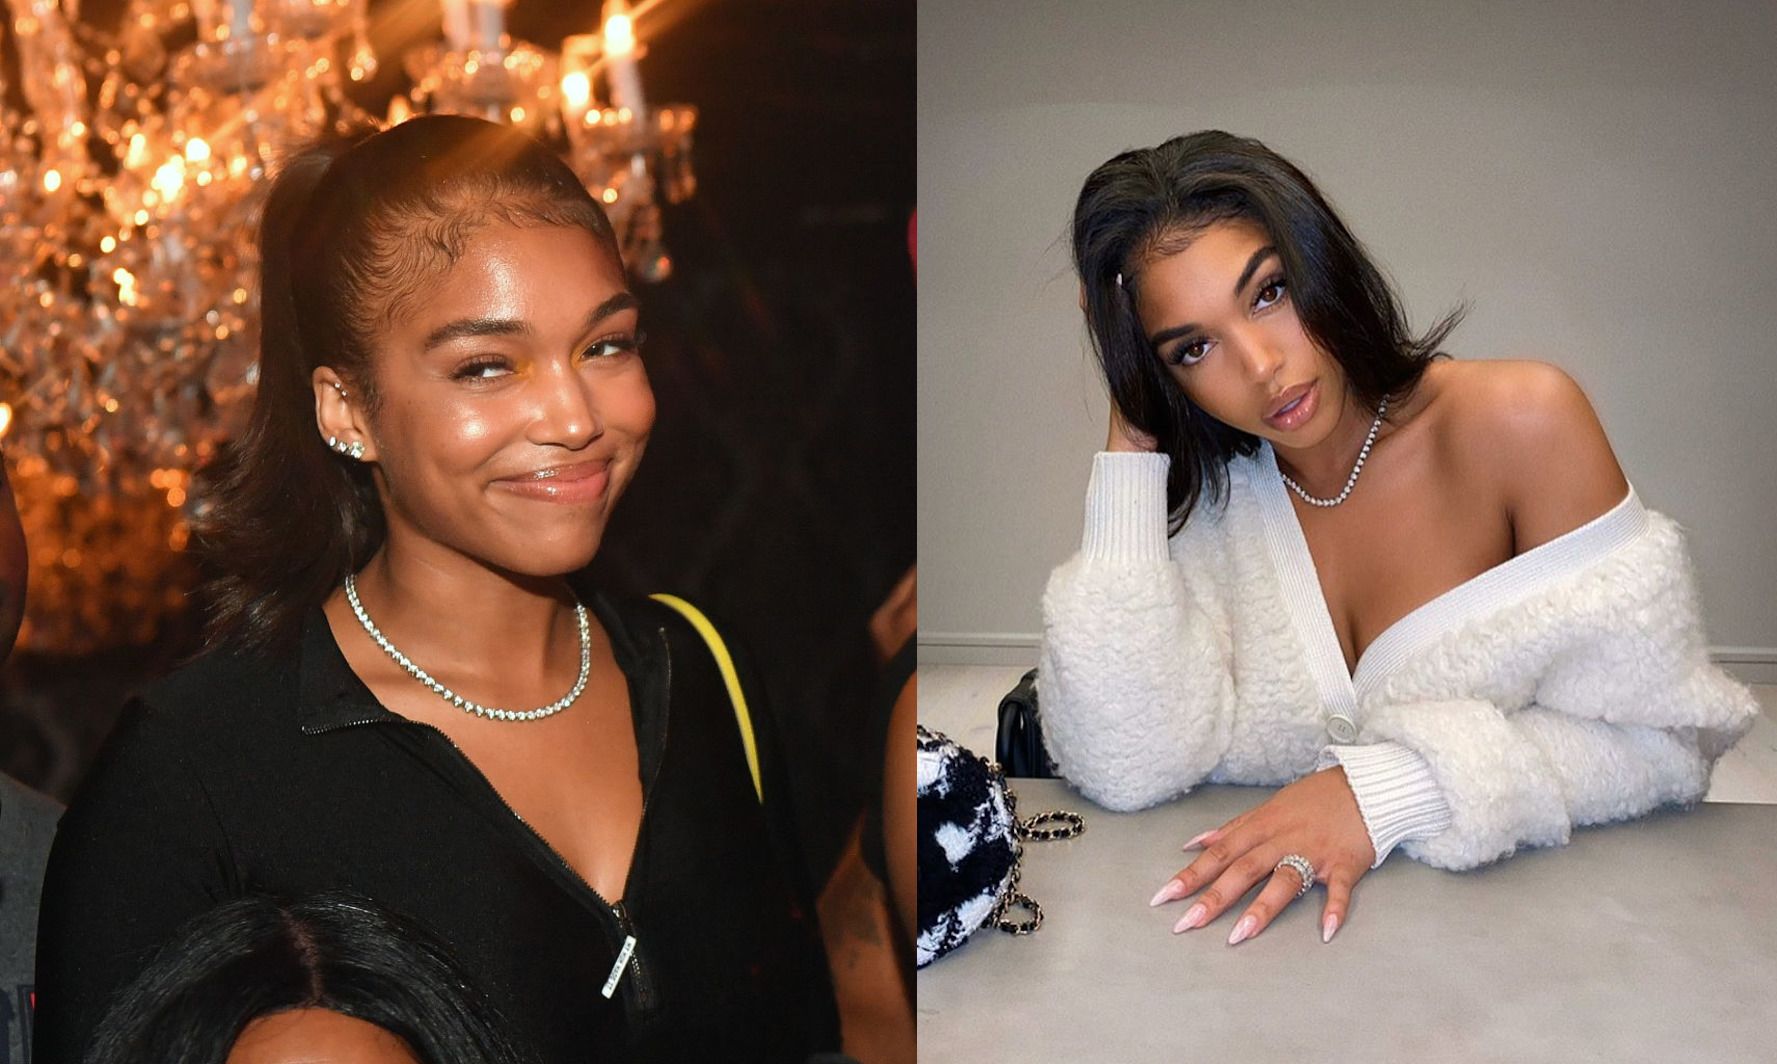 Lori Harvey Sparks Rumors About Being Engaged or Married to Rapper Future